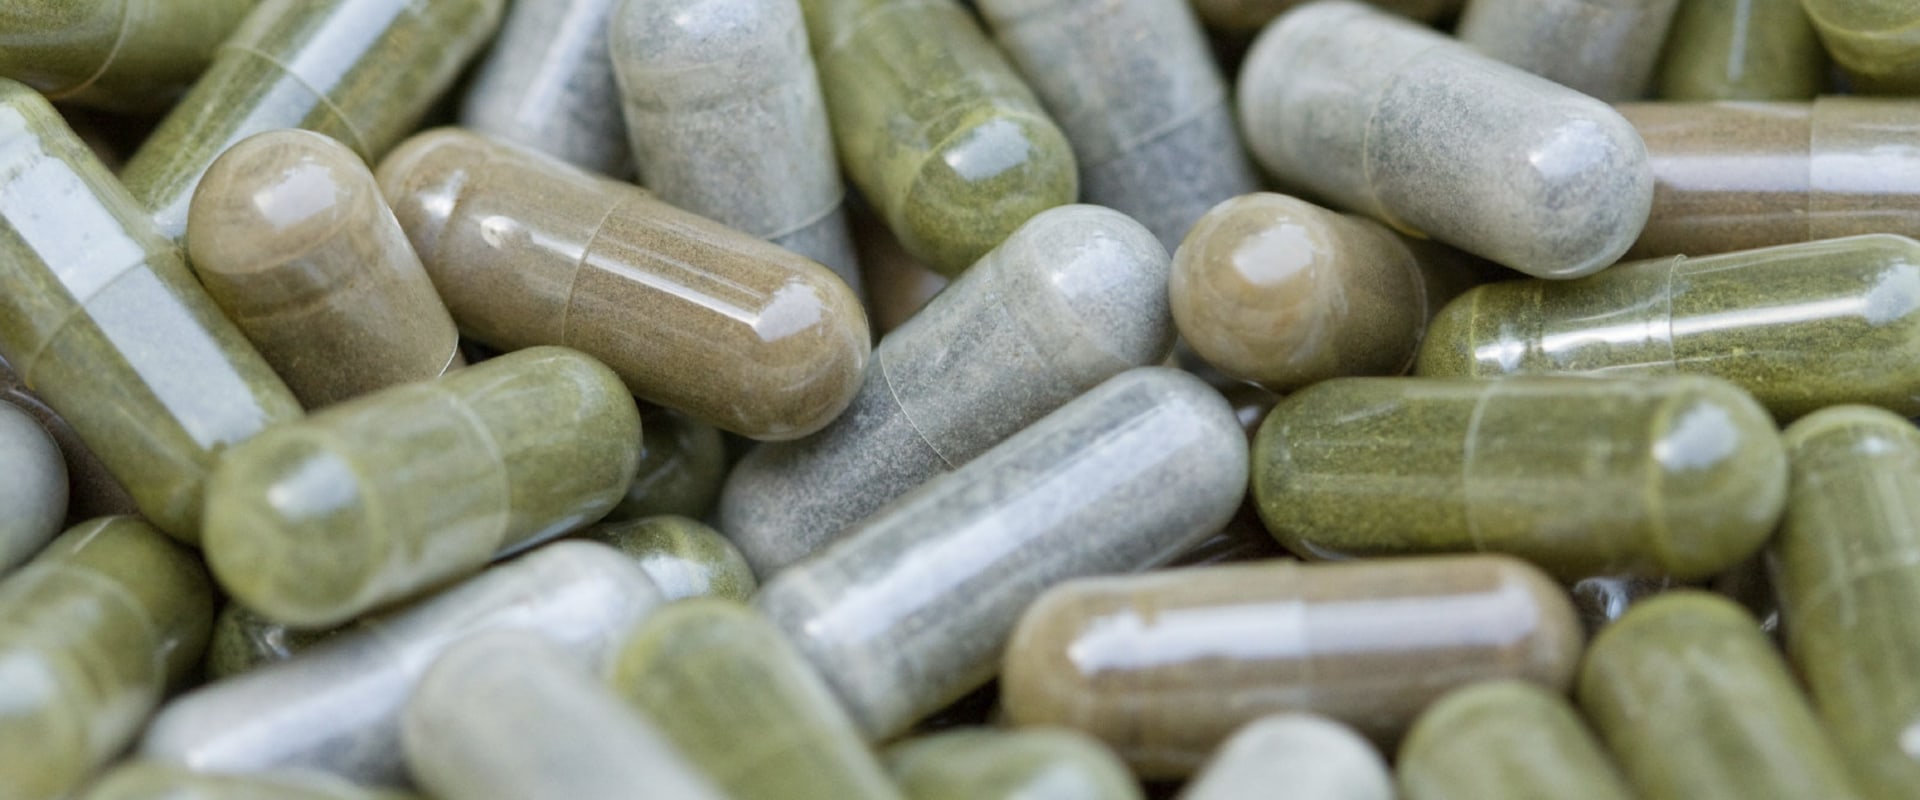 What to Do if You Experience an Adverse Reaction to Dietary Supplements